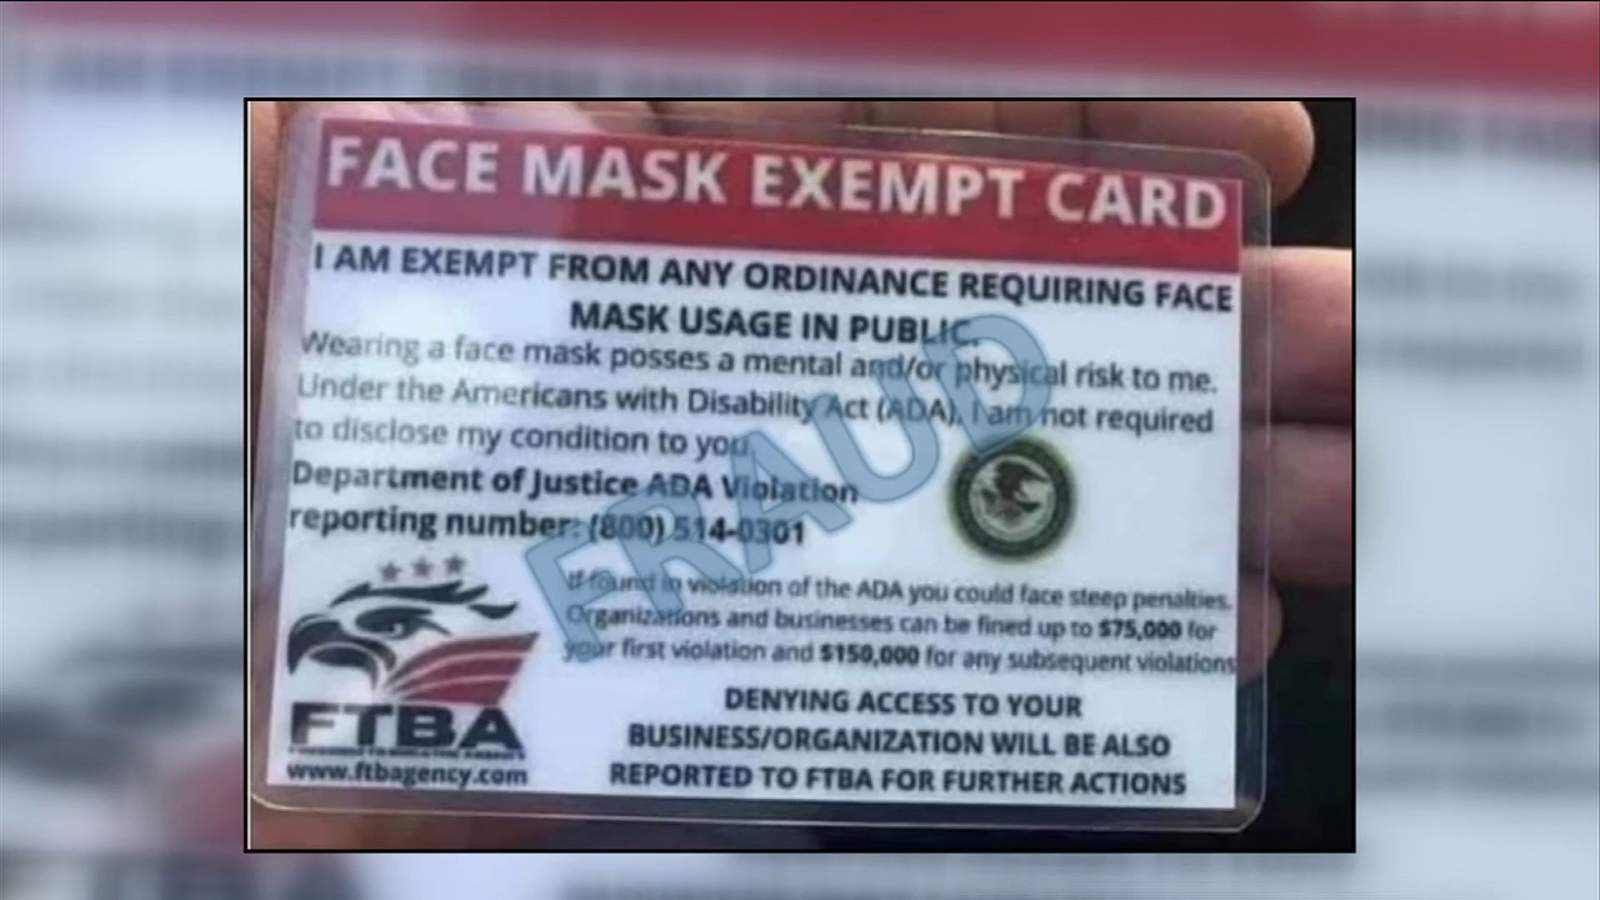 Consumer groups warning of fraudulent ‘face mask exempt cards’